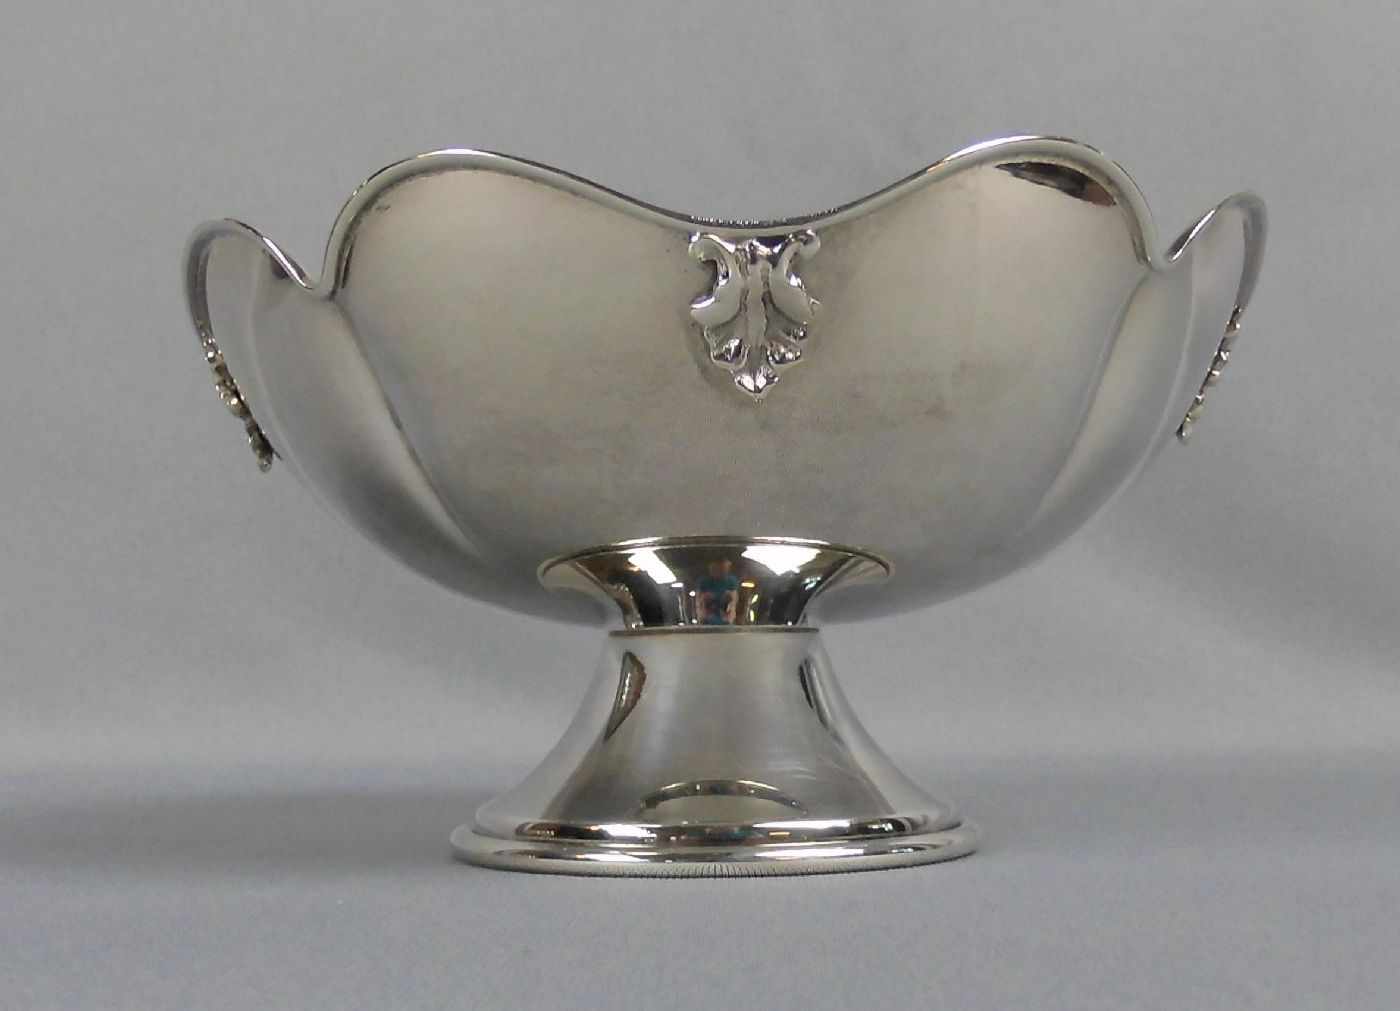 FUSSSCHALE / bowl on a stand, 800er Silber (190 g), Italien, Marke ab 1968, AL (Alessandria). - Image 2 of 3